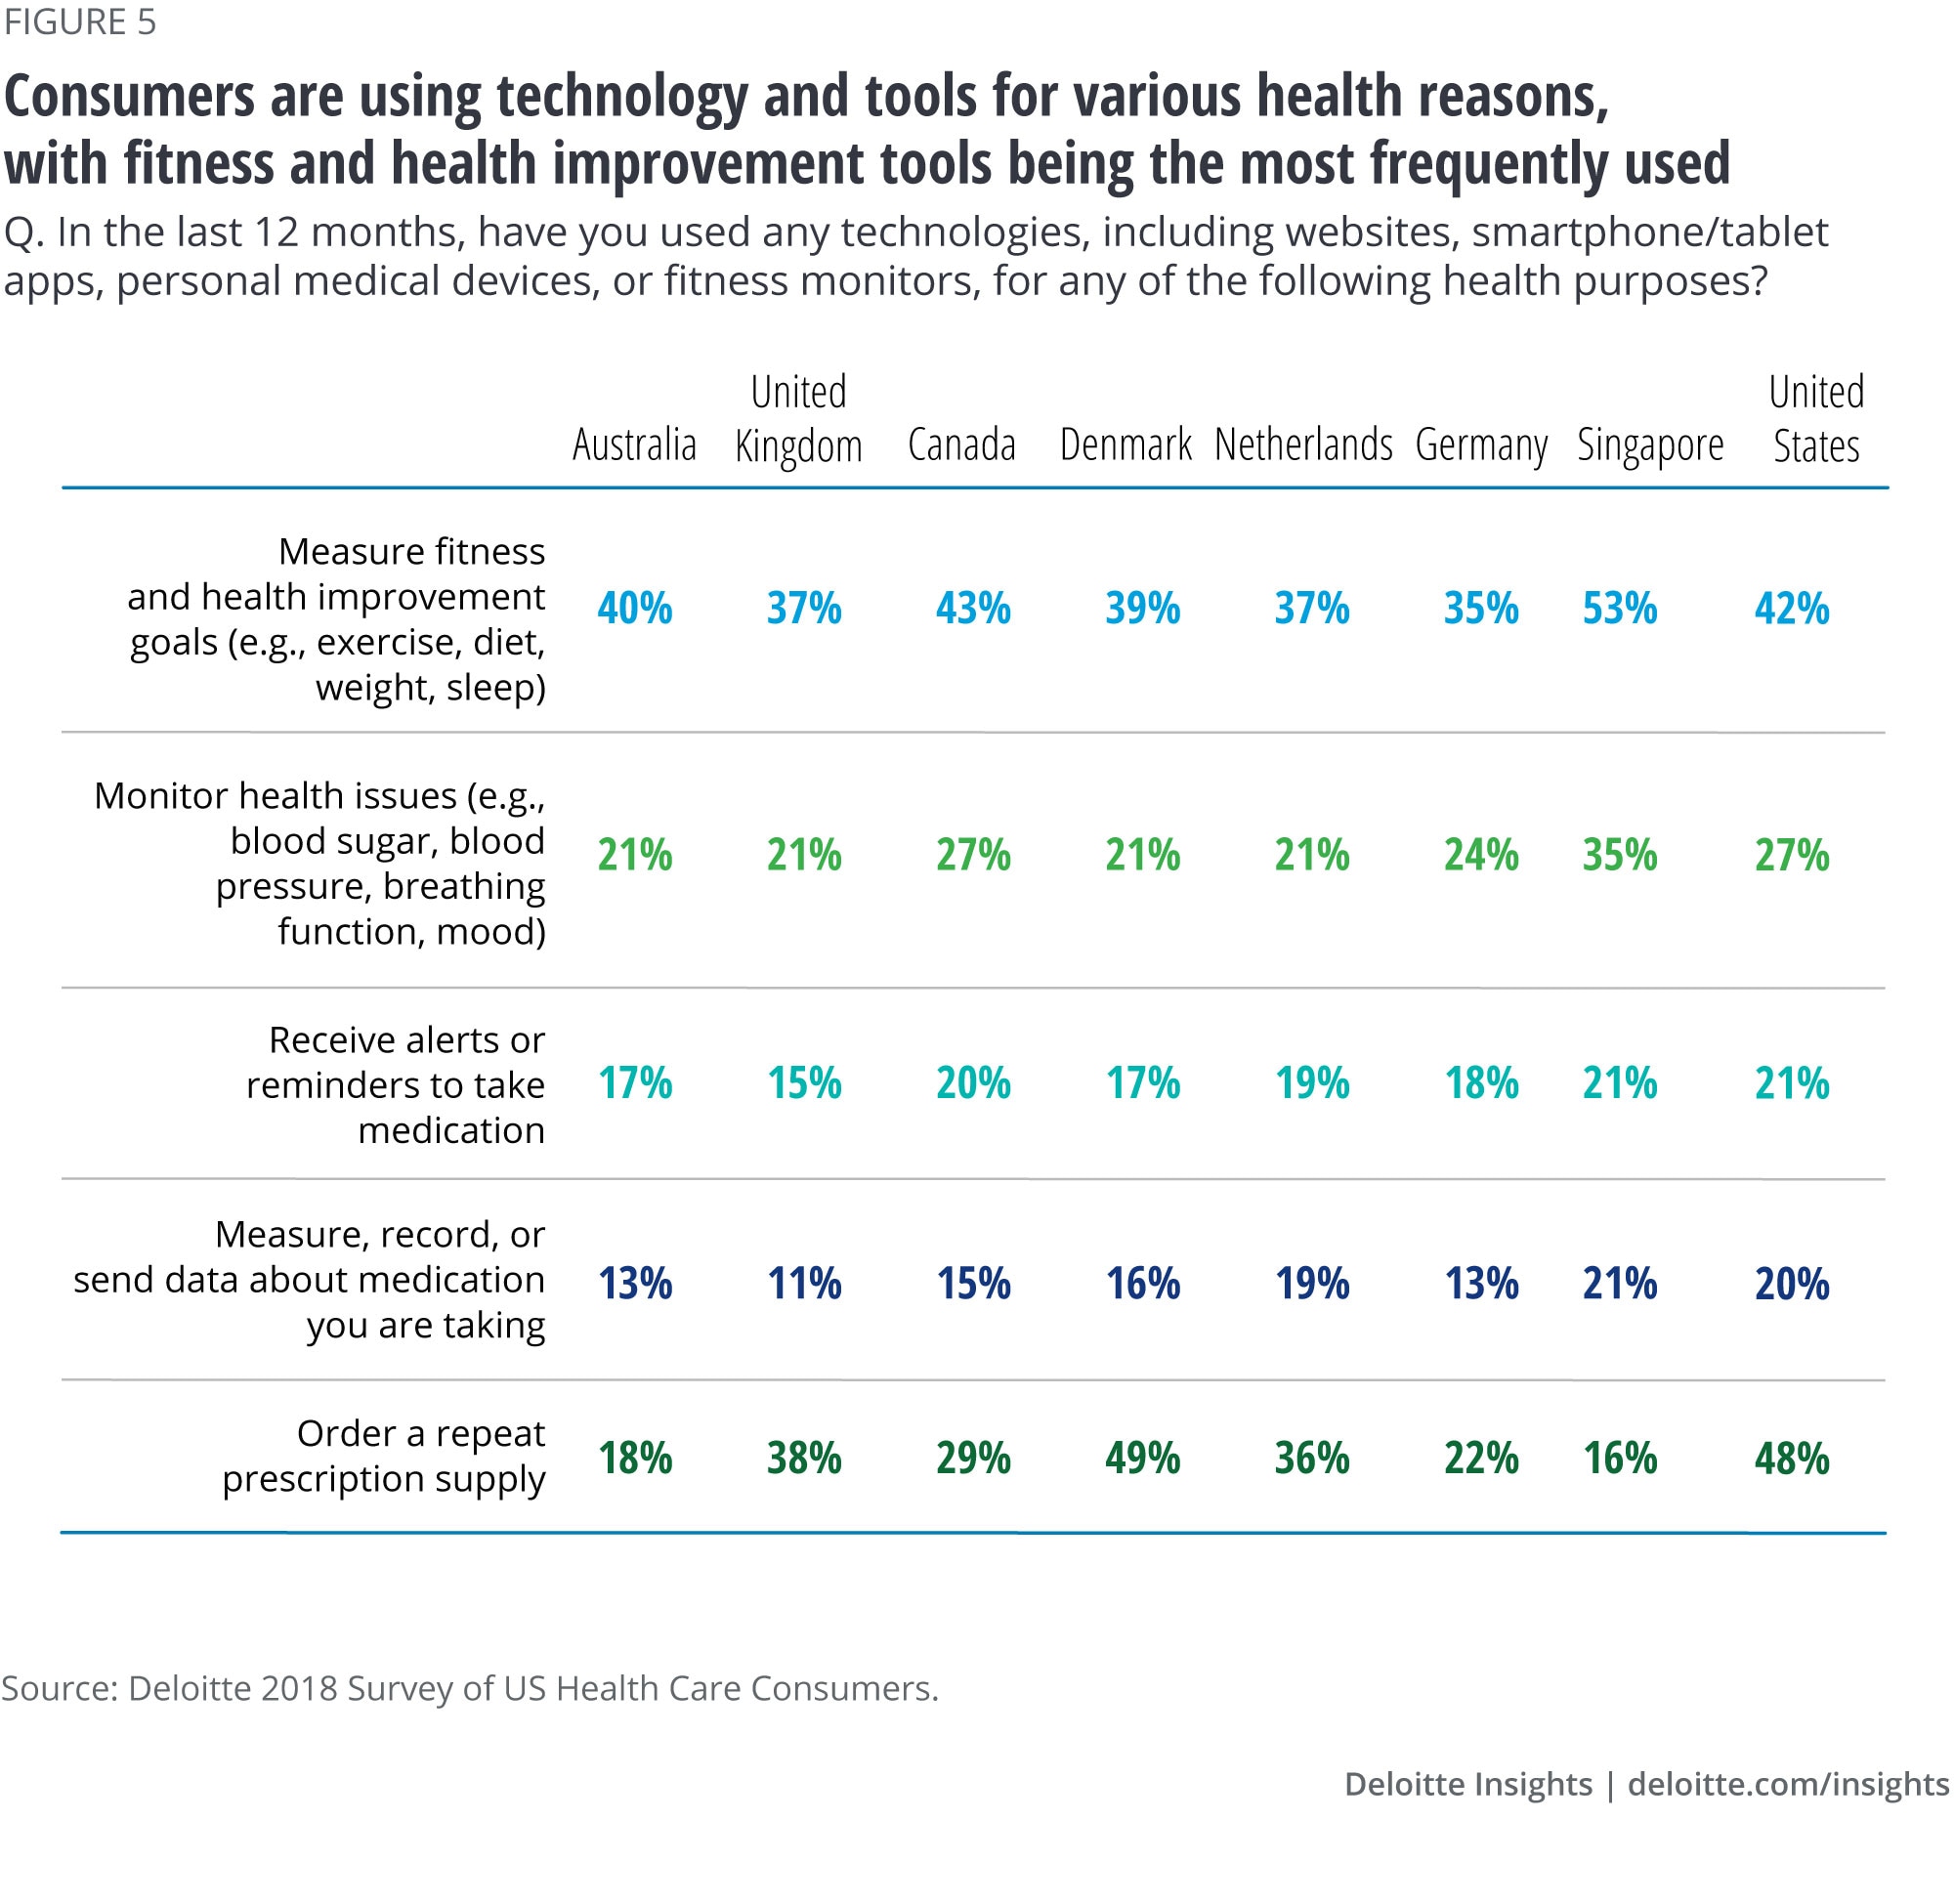 Consumers are using technology and tools for various health reasons, with fitness and health improvement tools being the most frequently used